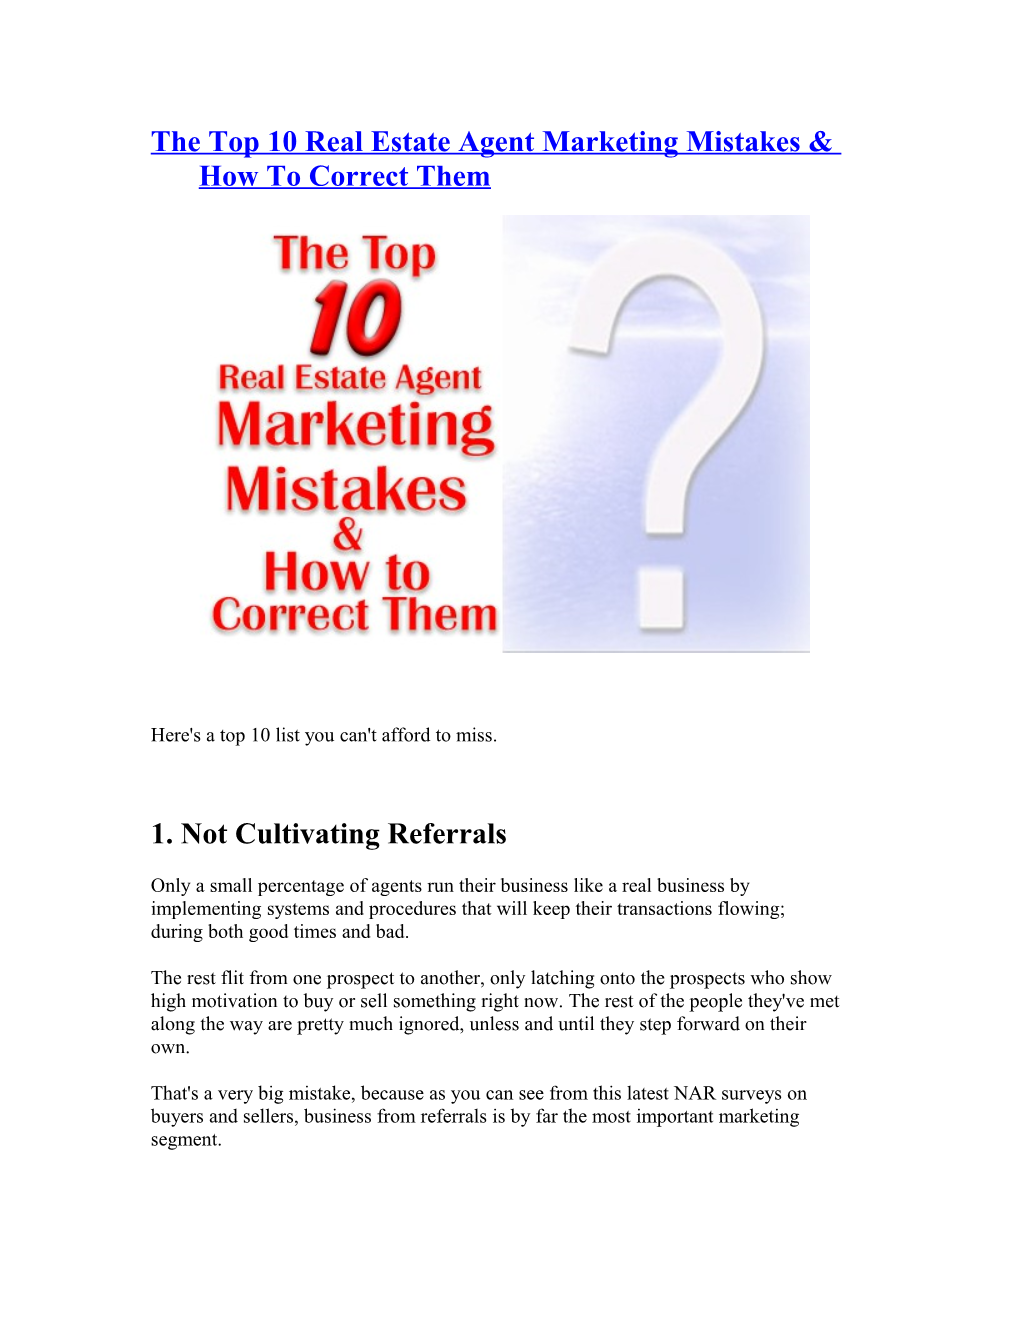 The Top 10 Real Estate Agent Marketing Mistakes & How to Correct Them